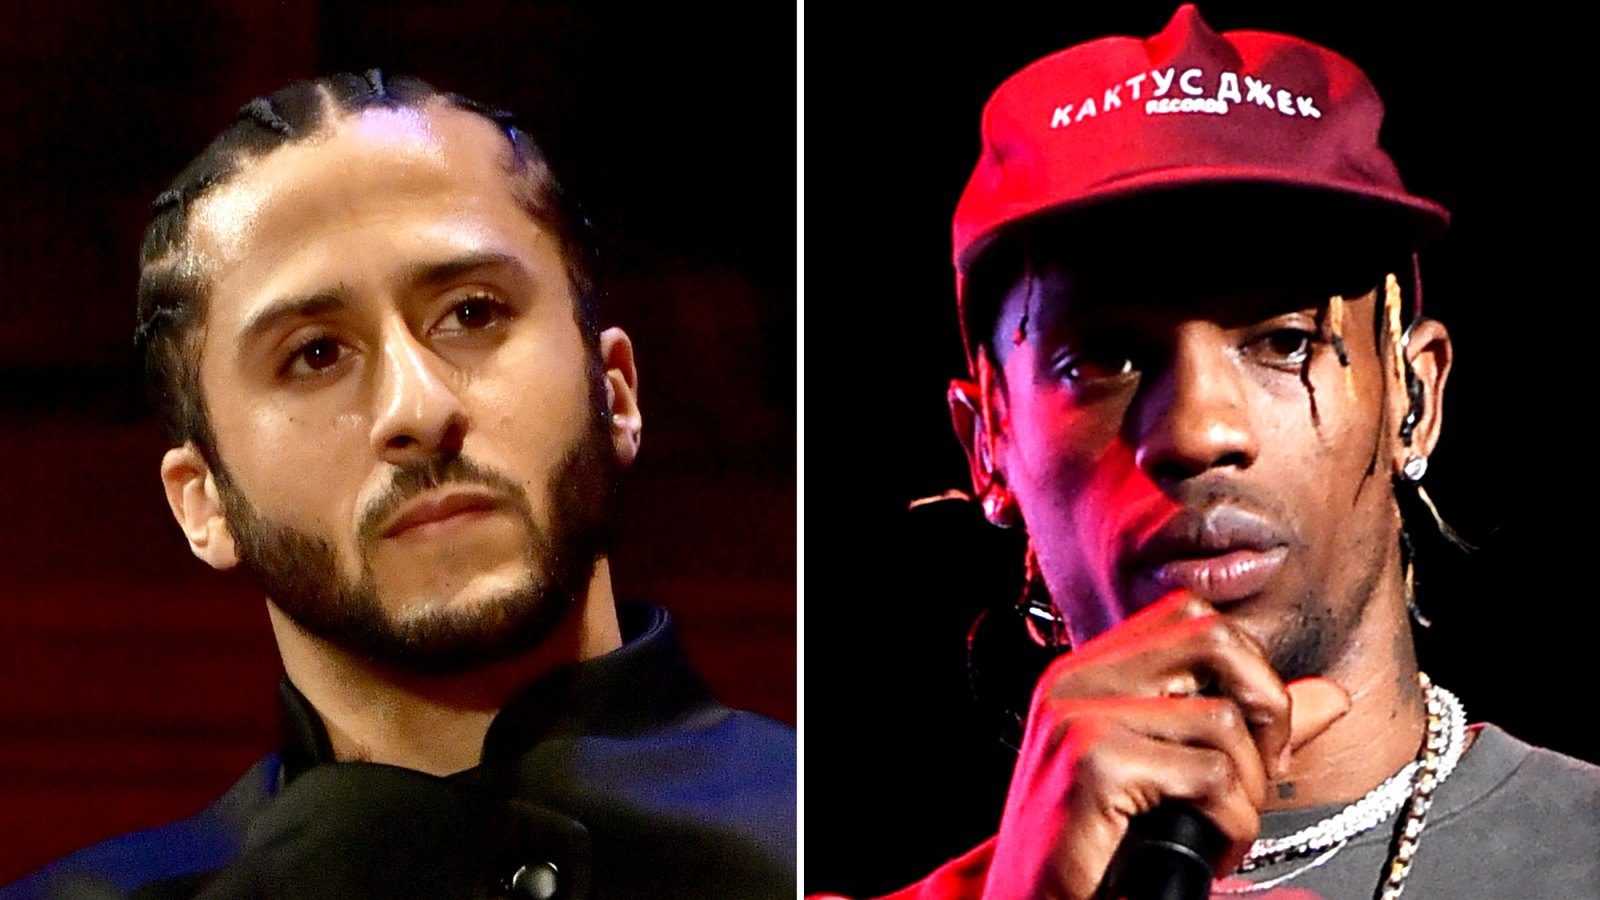 Colin Kaepernick Denies Report That He Spoke With Travis Scott About the Super Bowl 2019 Halftime Show